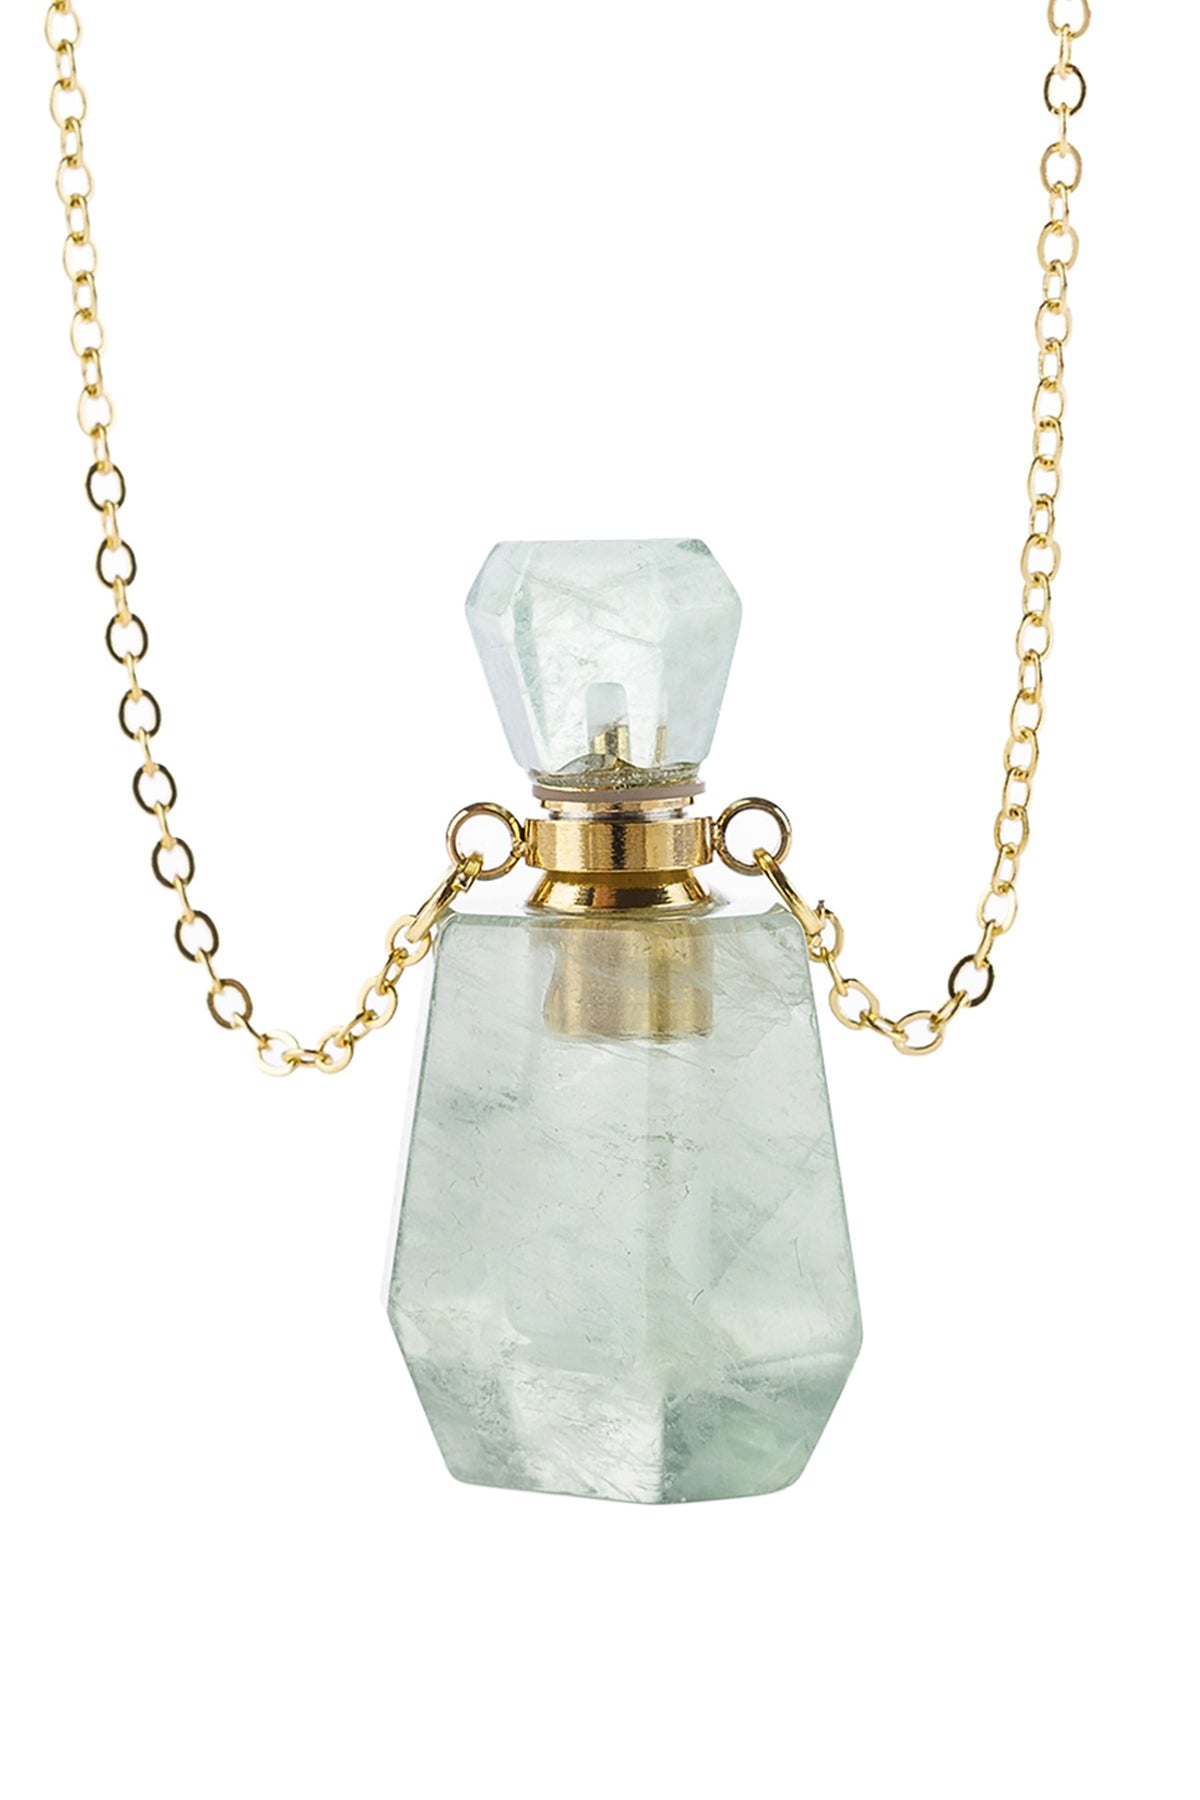 NATURAL STONE ROUNDED CRYSTAL PERFUME BOTTLE NECKLACE WITH BOX